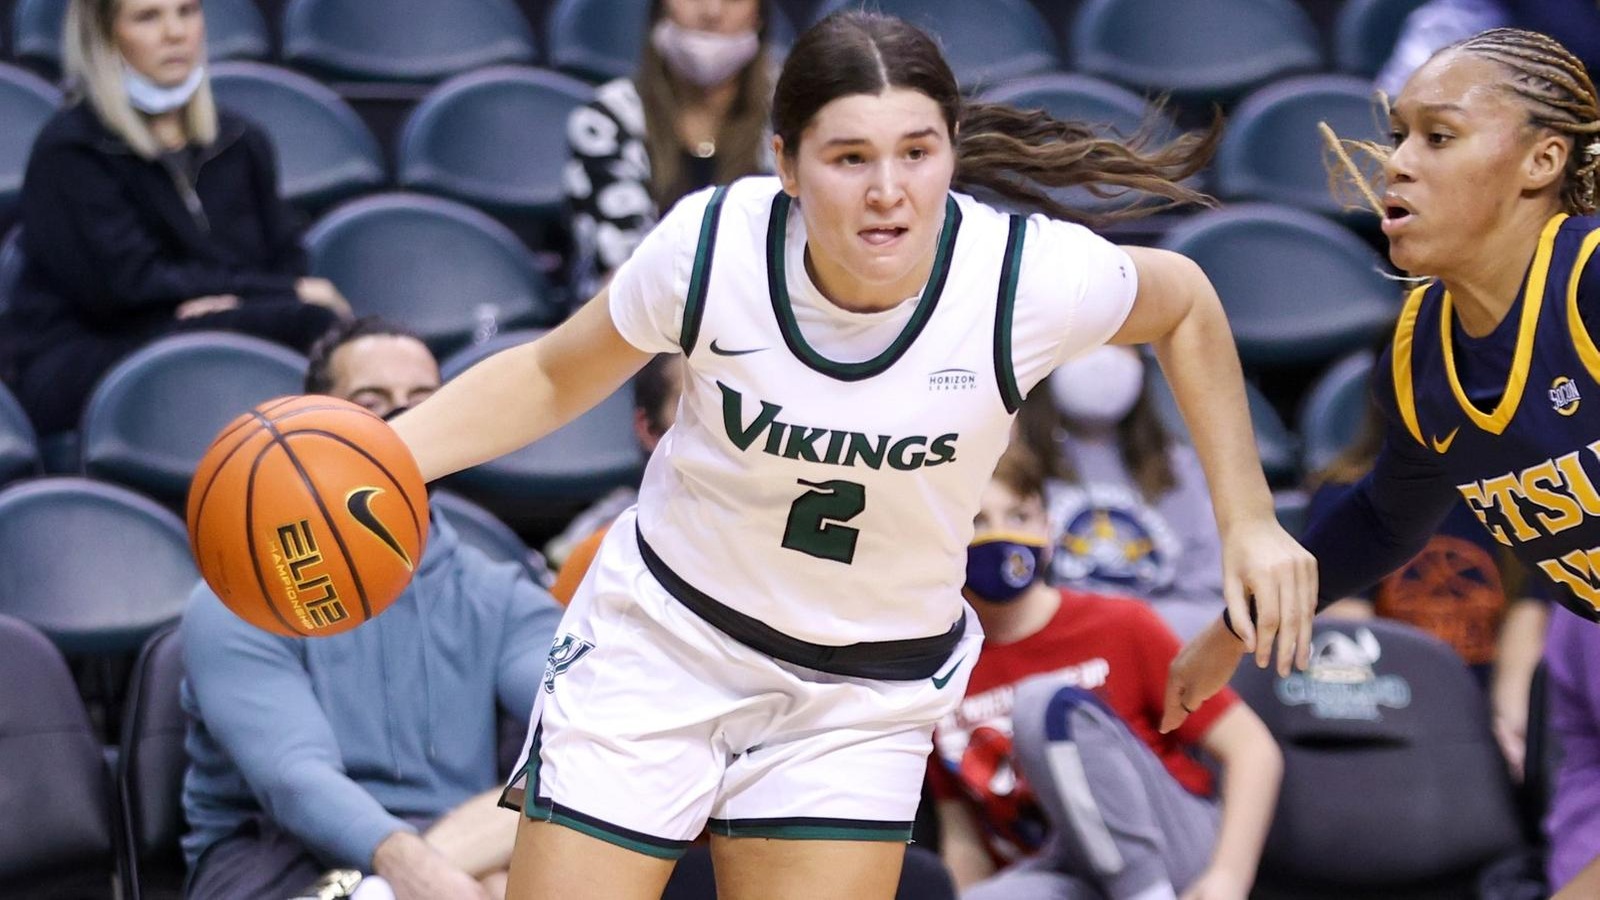 Cleveland State Women’s Basketball Advances To #HLWBB Semifinals With 59-51 Victory Over NKU